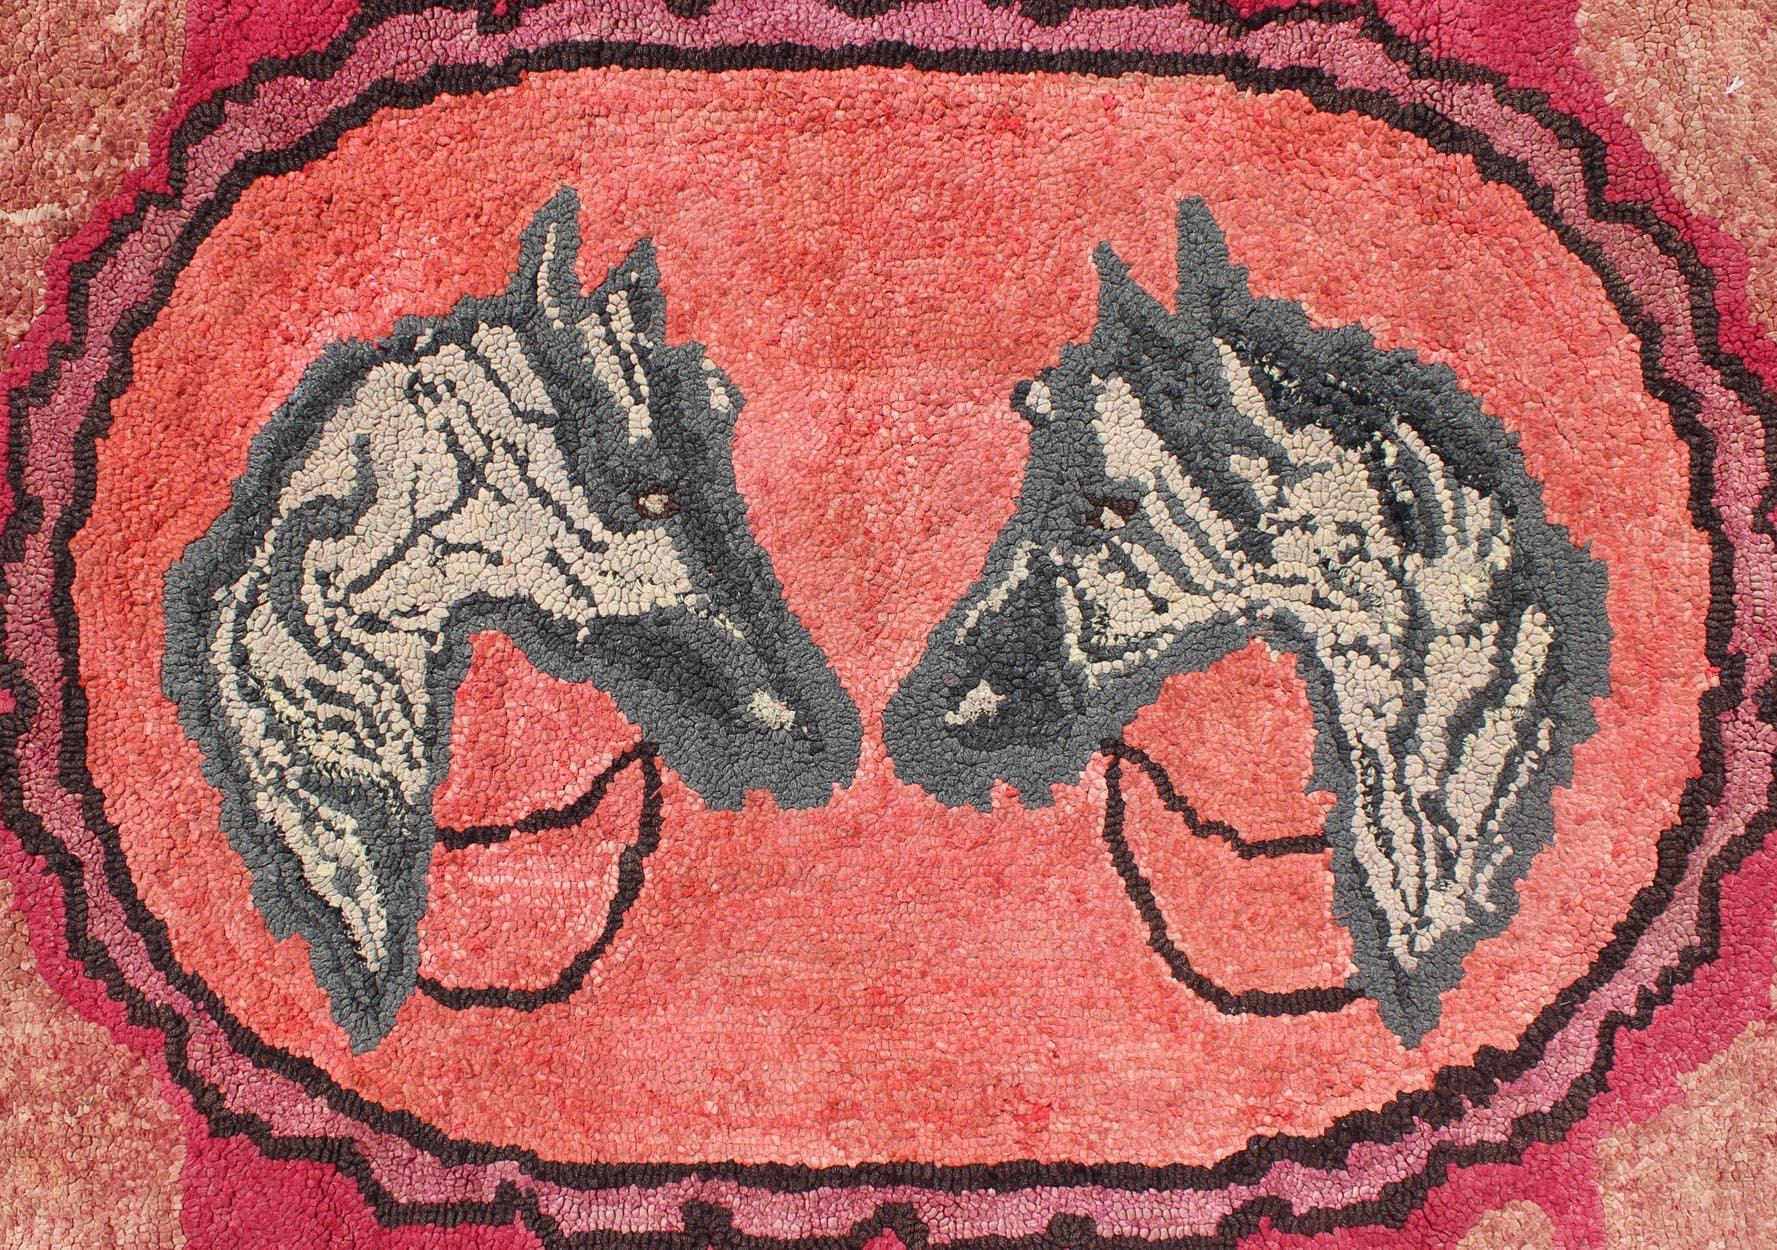 Hand-Woven American Hooked Rug with Double Horse Heads 